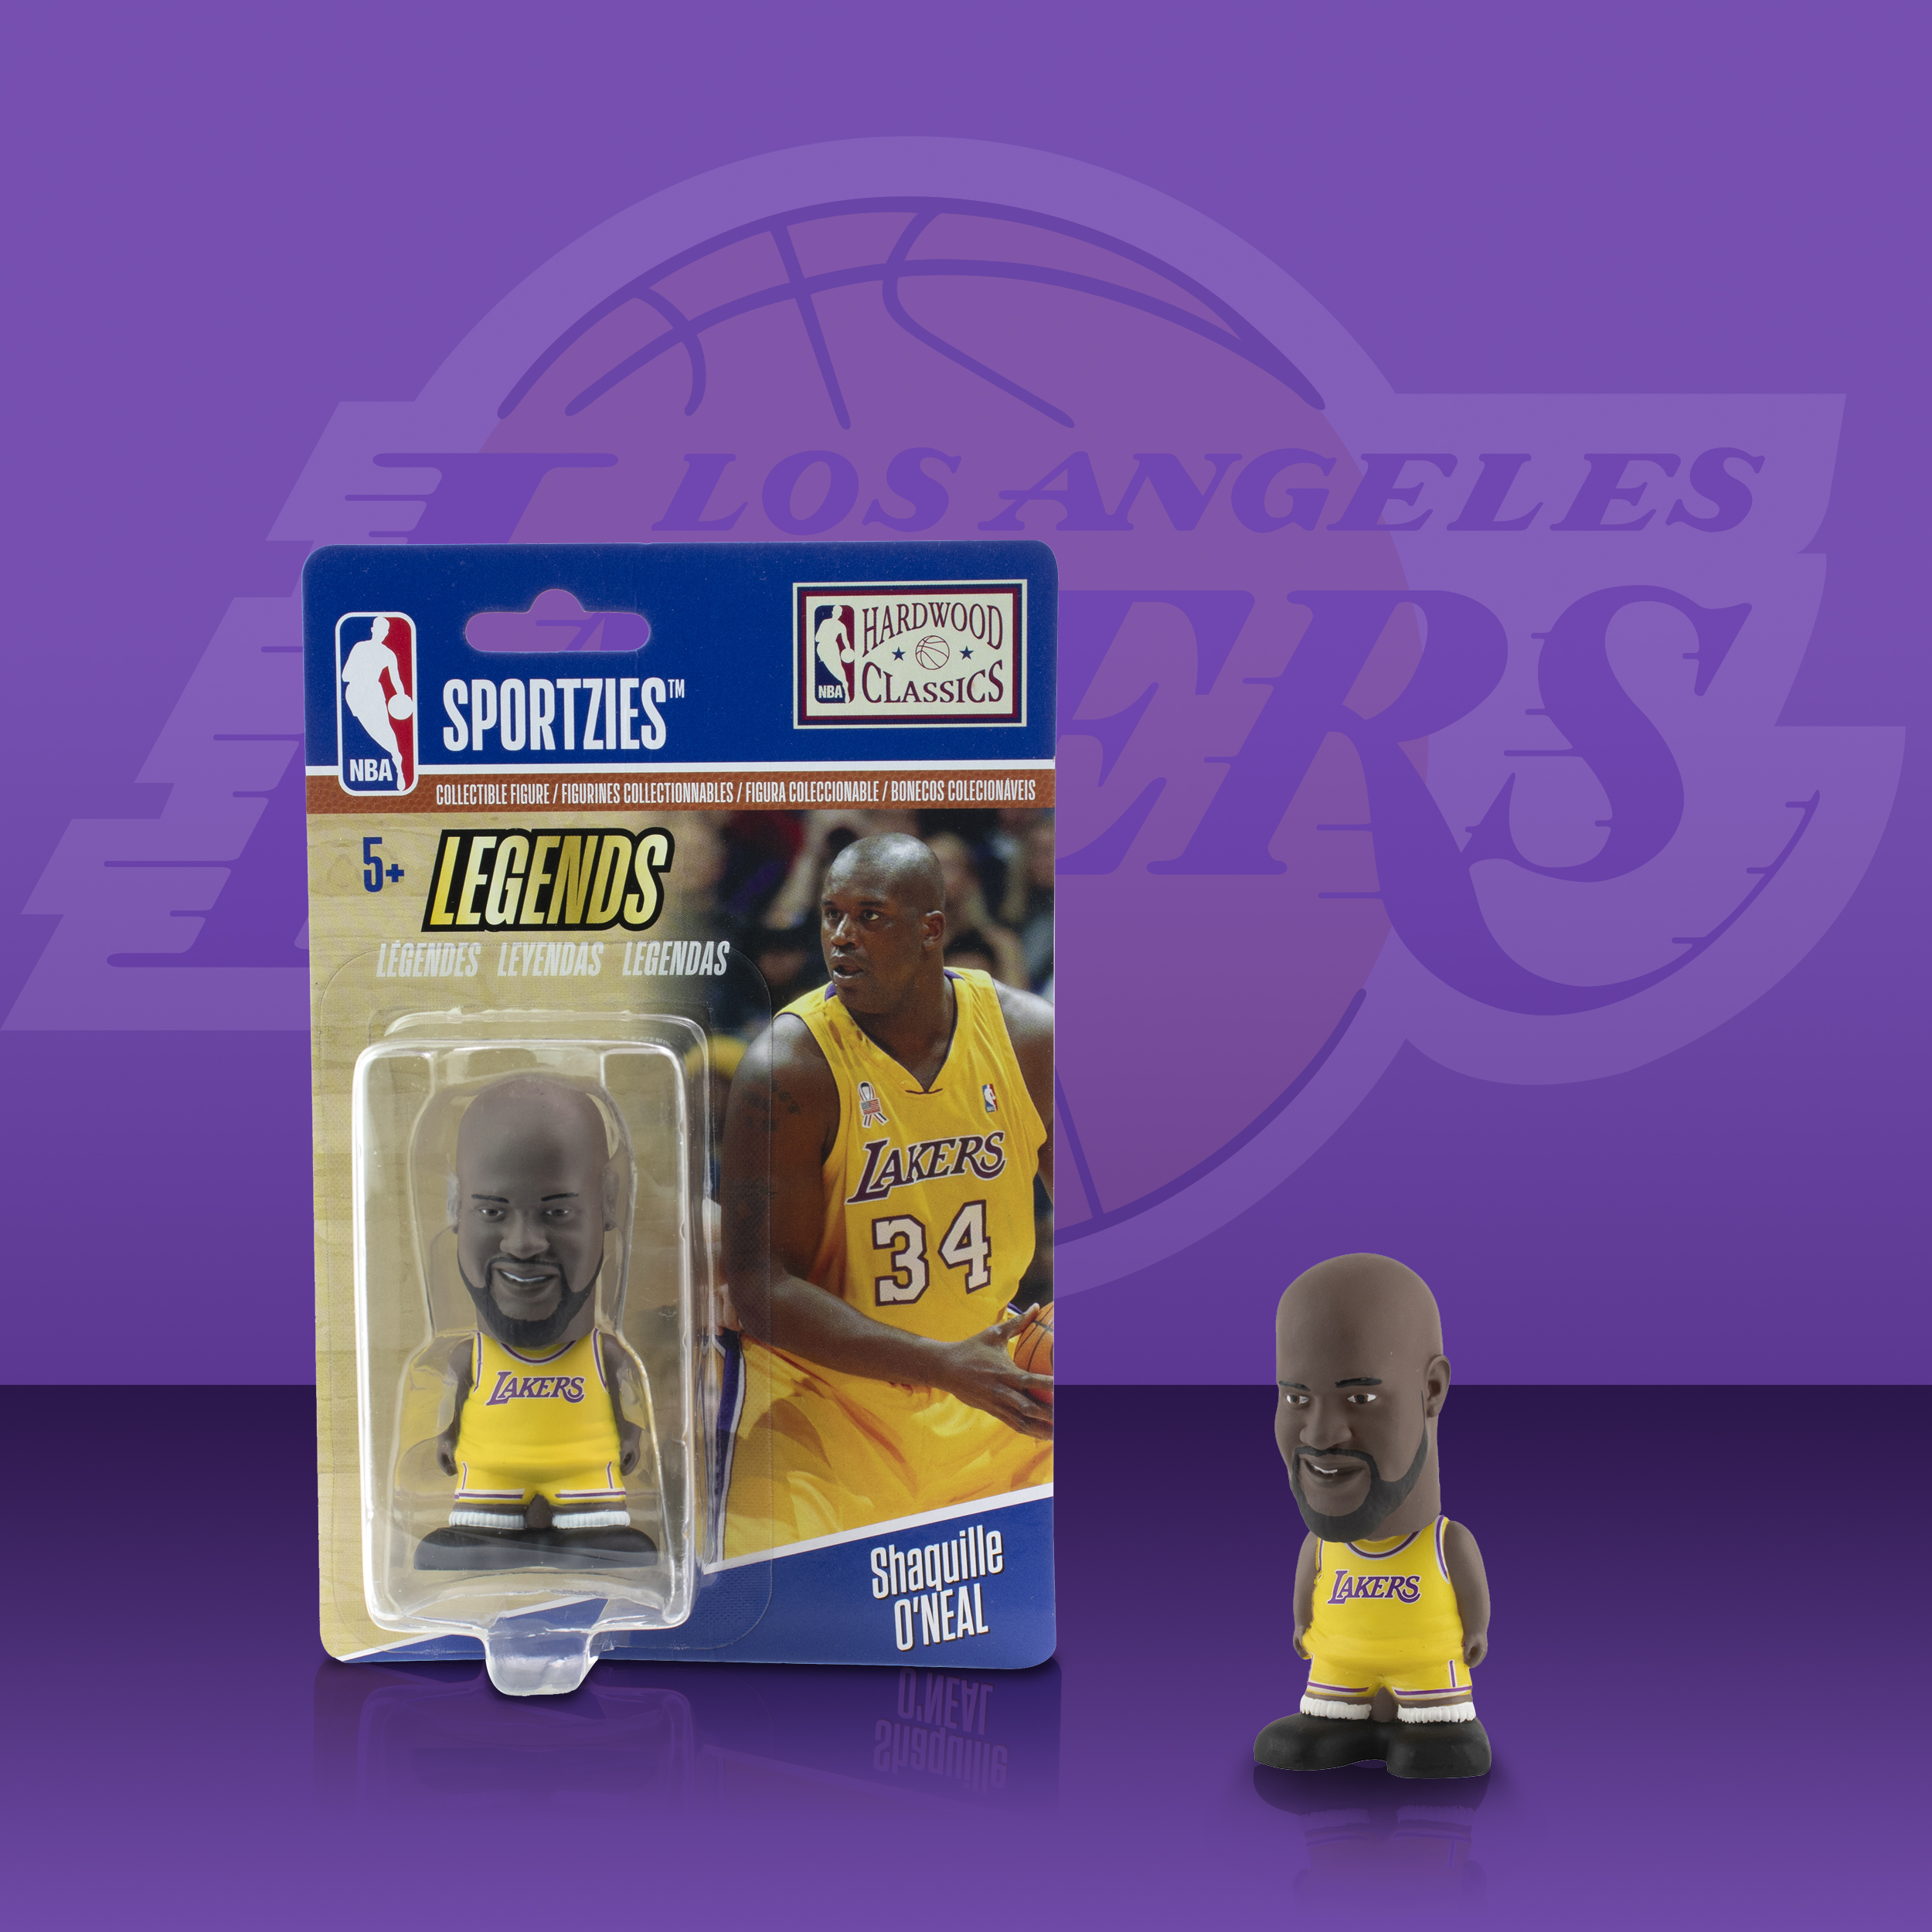 Packaging for NBA Figurines